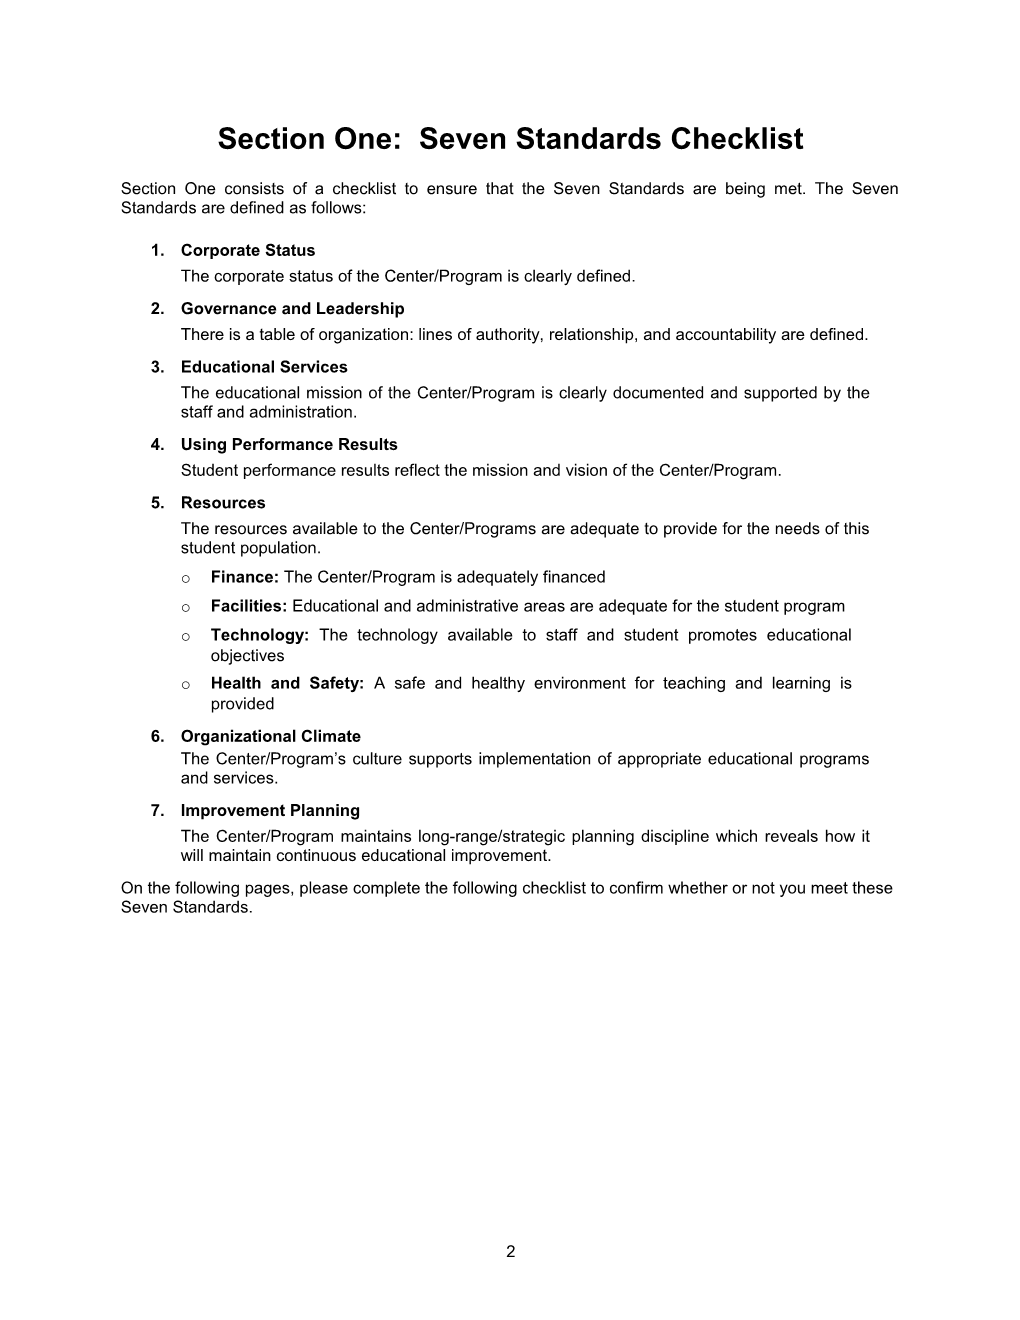 Section One: Seven Standards Checklist